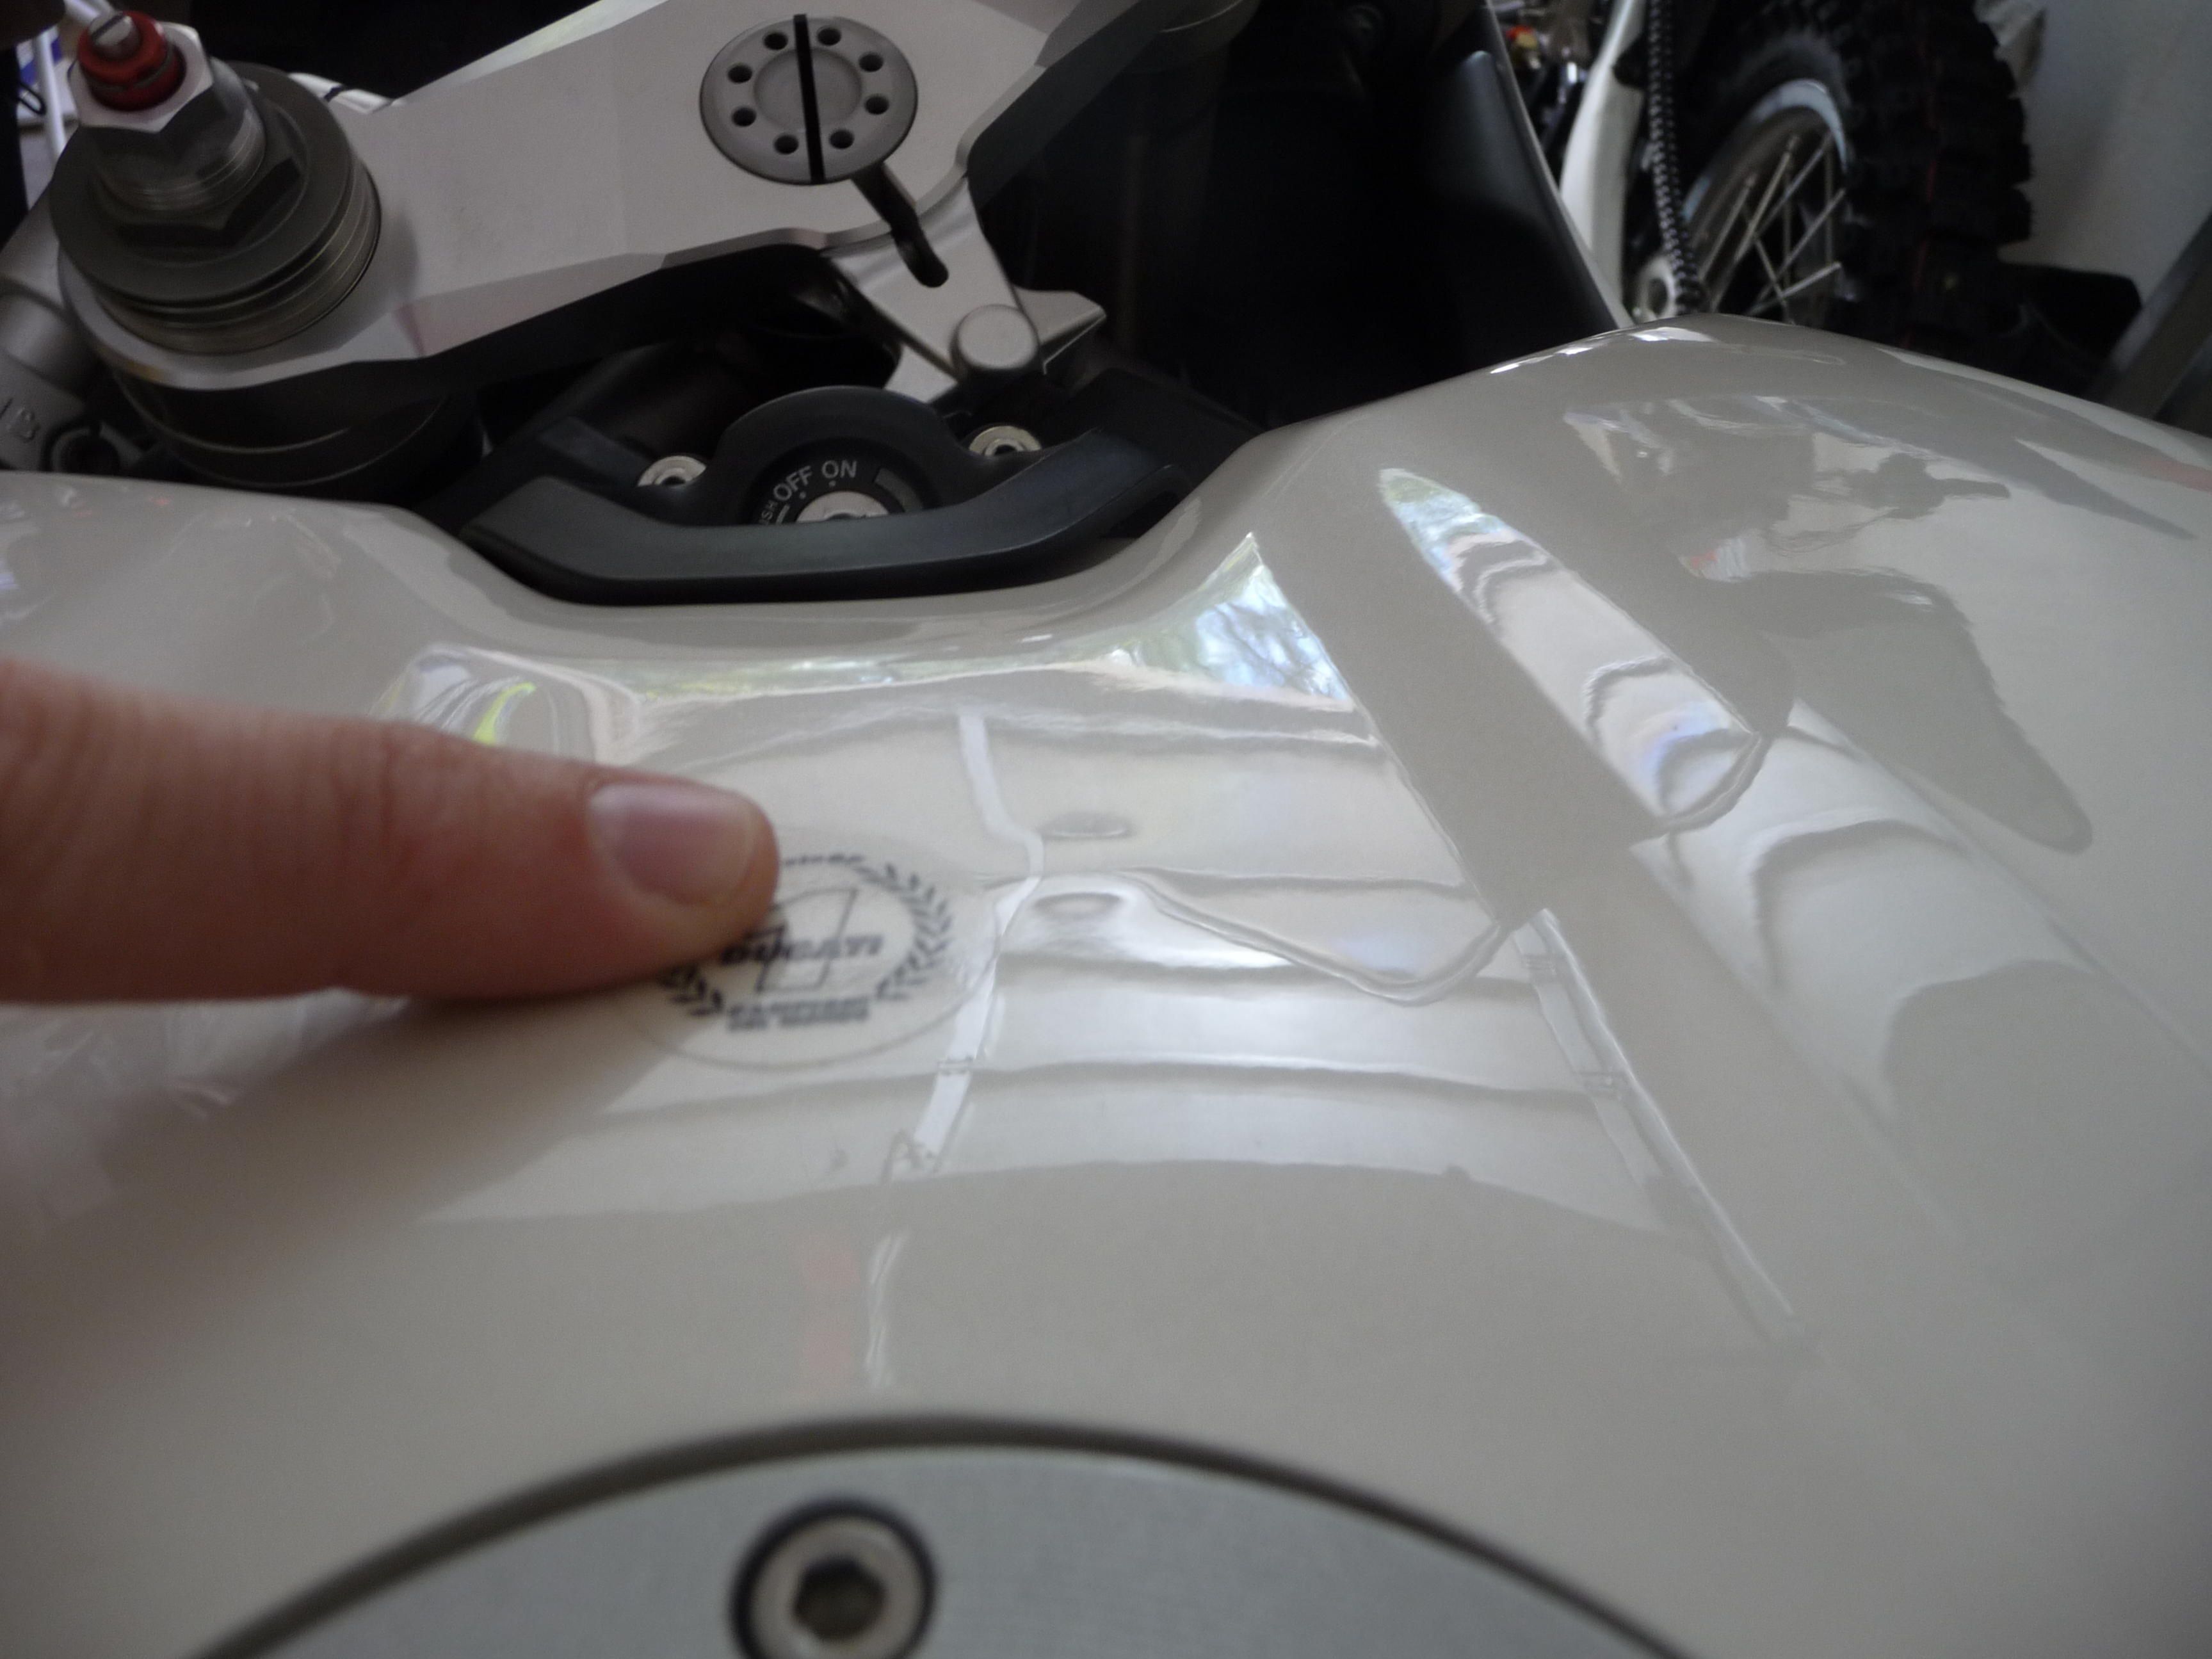 Finger points at a deformity on a white Ducati fuel tank